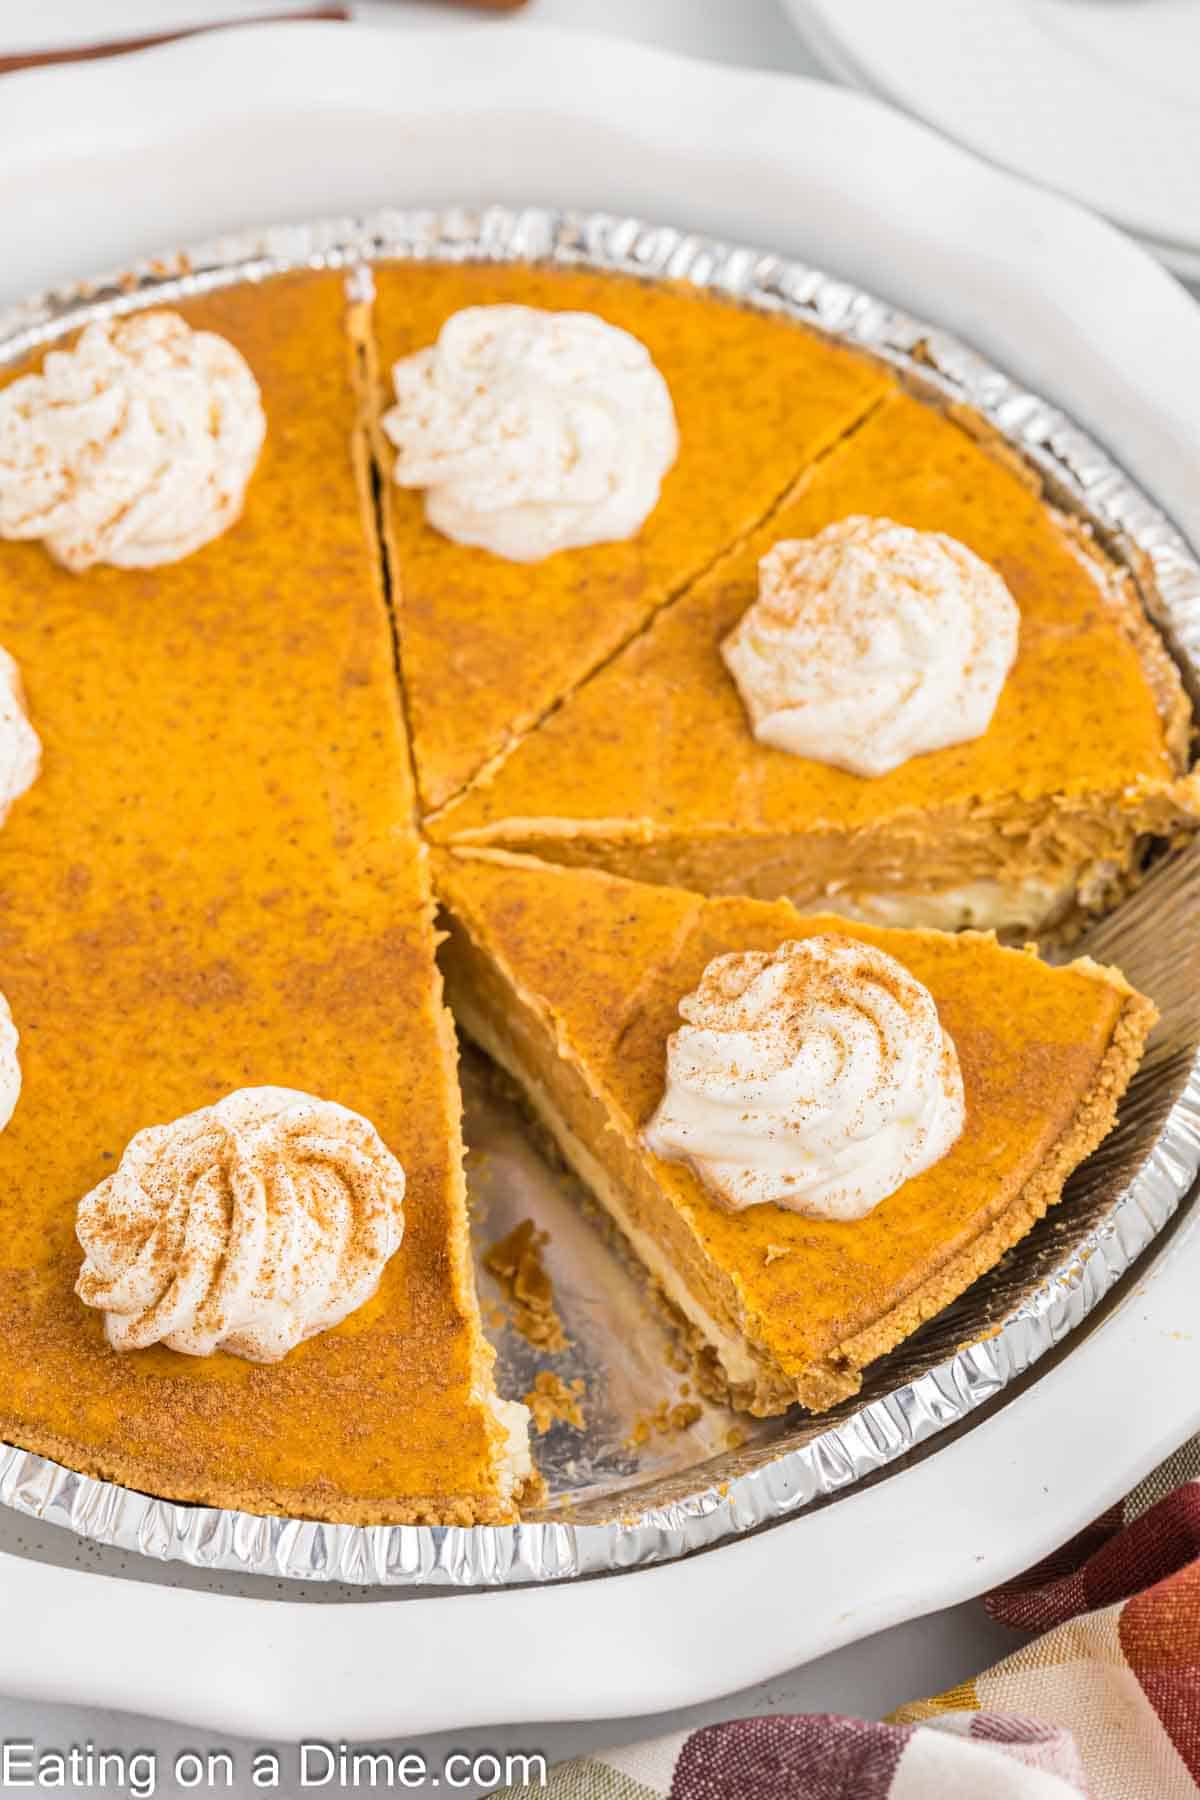 A pumpkin cheesecake pie in a silver baking dish, topped with swirls of whipped cream and sprinkled with cinnamon. A slice has been removed, revealing its creamy interior. The pie is placed on a white surface, with a seasonal cloth partially visible at the bottom.